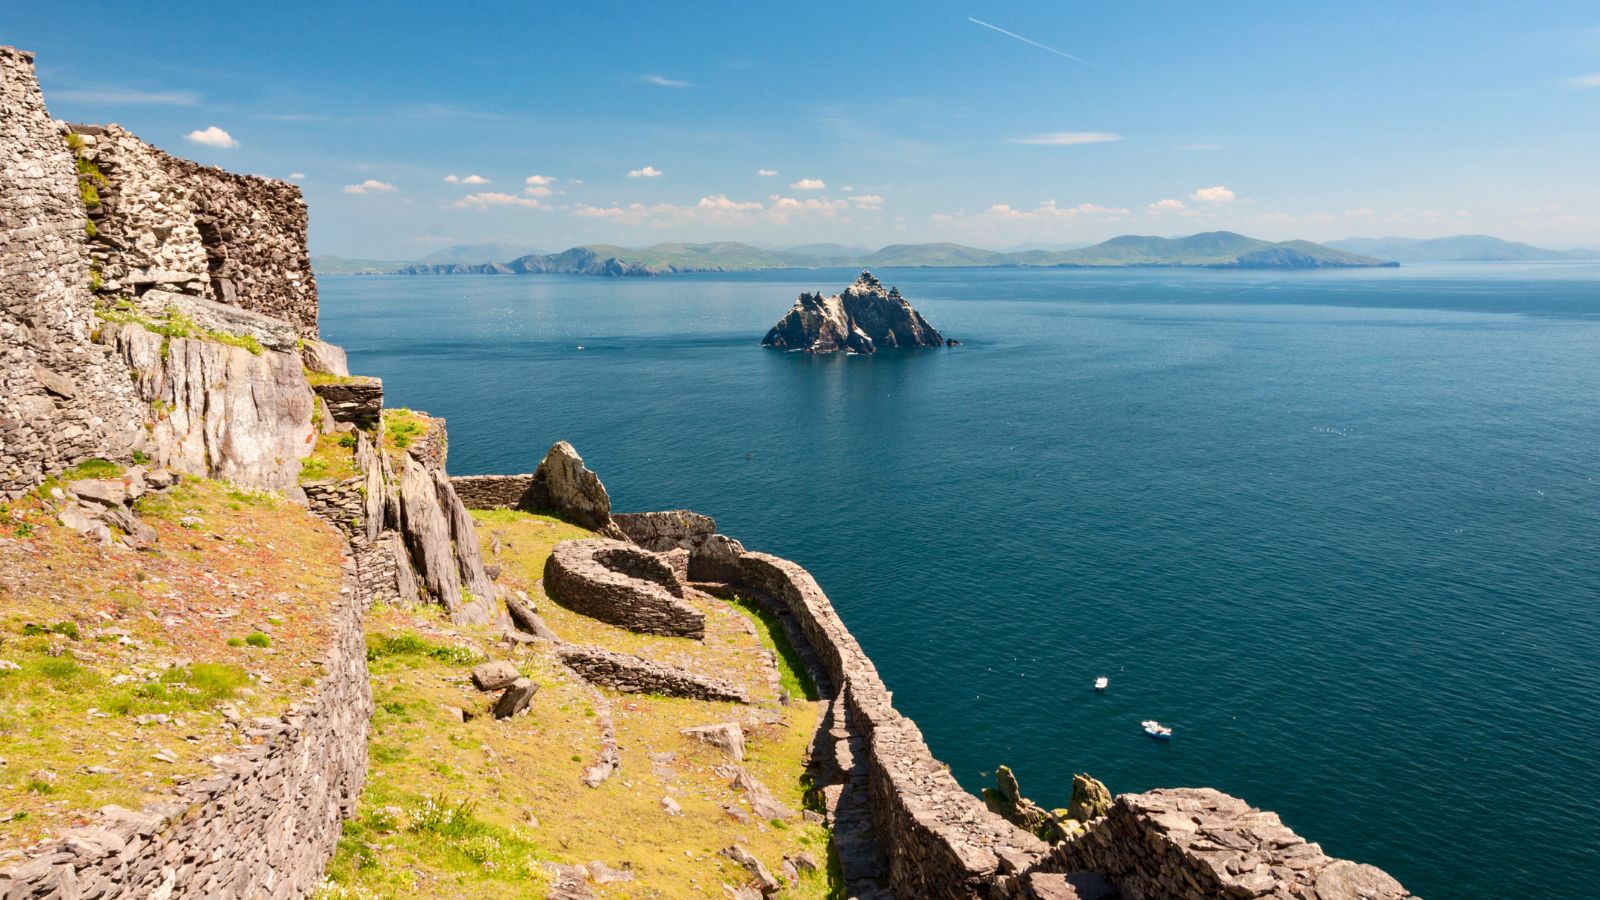 <p>Anyone looking for an adventure should go to Skellig Michael. This striking island off the coast of County Kerry is a UNESCO World Heritage Site featured in two Star Wars movies (the Force Awakens and The Last Jedi) and has an ancient monastic settlement on top.</p><p>Skellig Michael is the definition of rugged. It’s isolated, too, taking about an hour to get there by boat. I’ve read that it’s only open to visitors from May to September. Furthermore, there are tight controls on how many people can go, so book months ahead to secure your spot.</p>